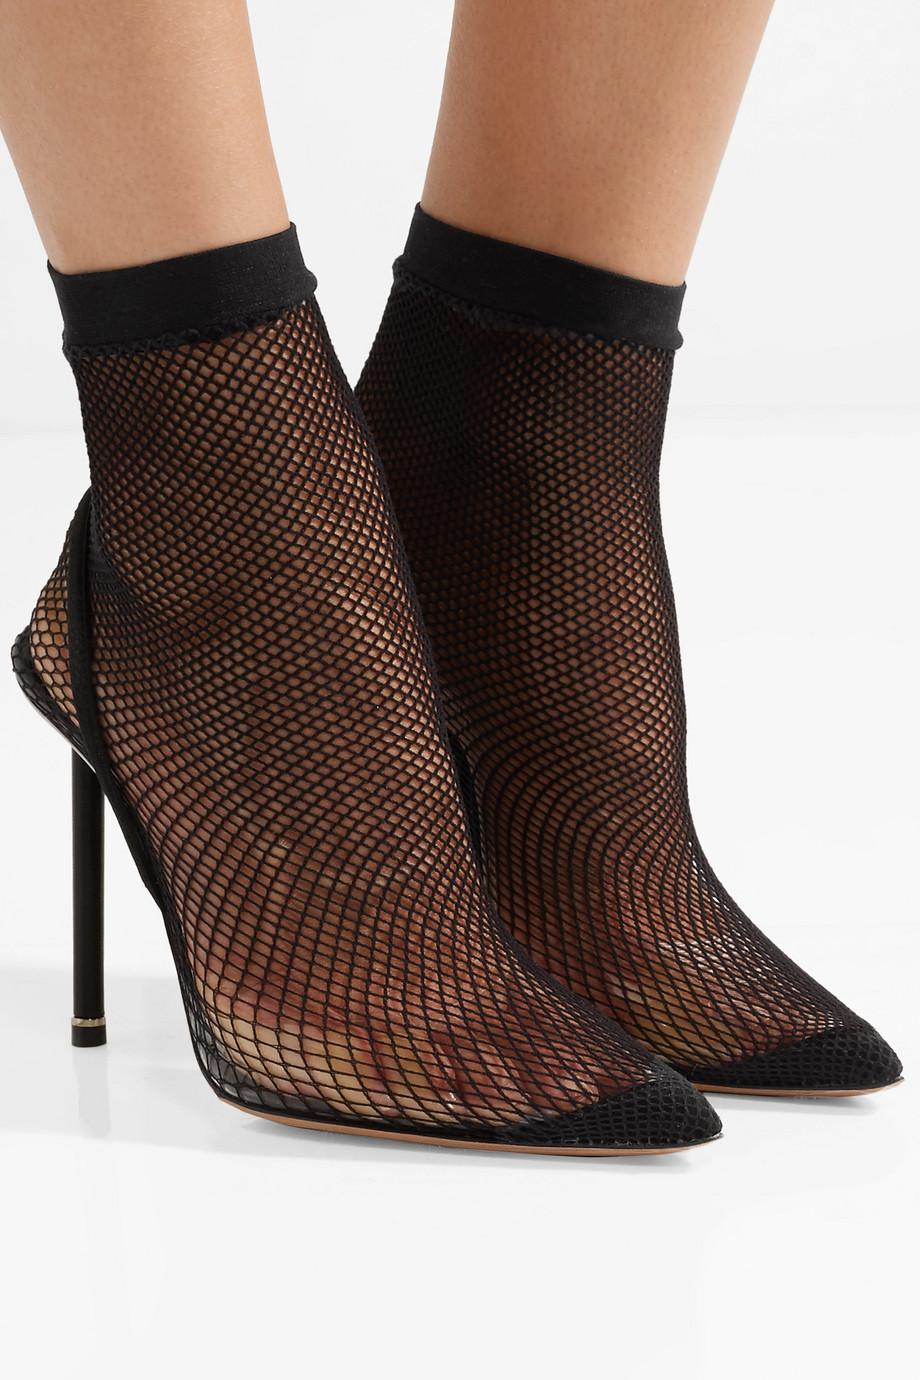 Alexander Wang Caden Suede And Leather-trimmed Fishnet Sock Boots in Black  | Lyst